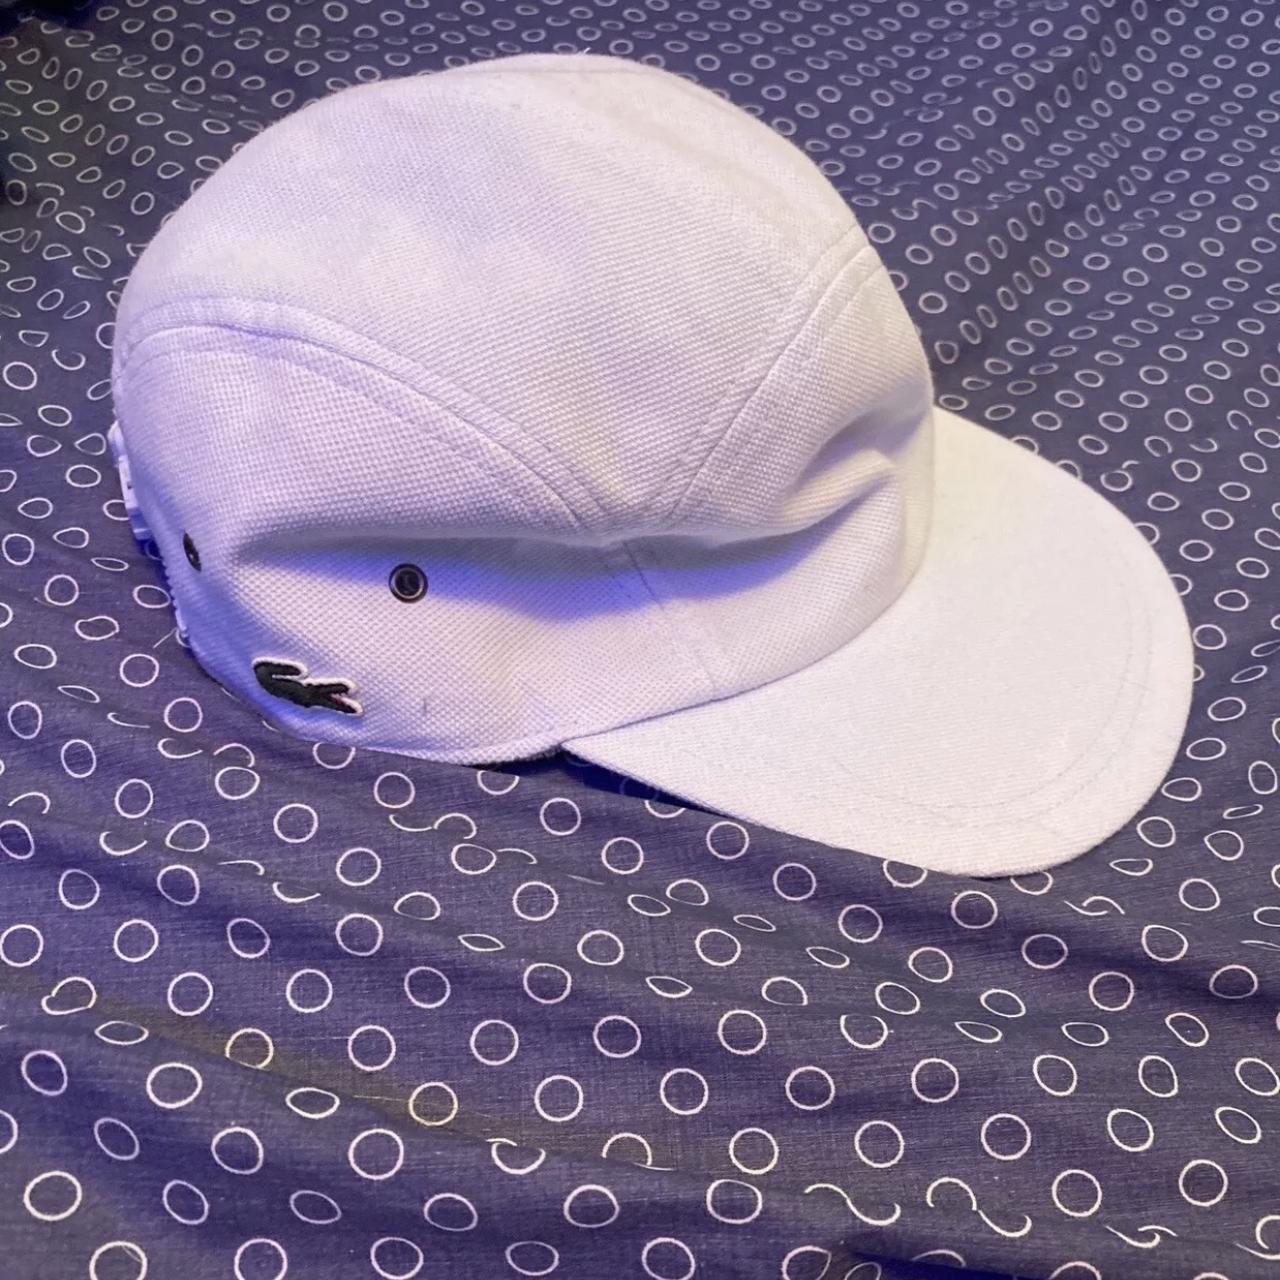 Supreme x lacoste pique light blue hat SS17. firm on...